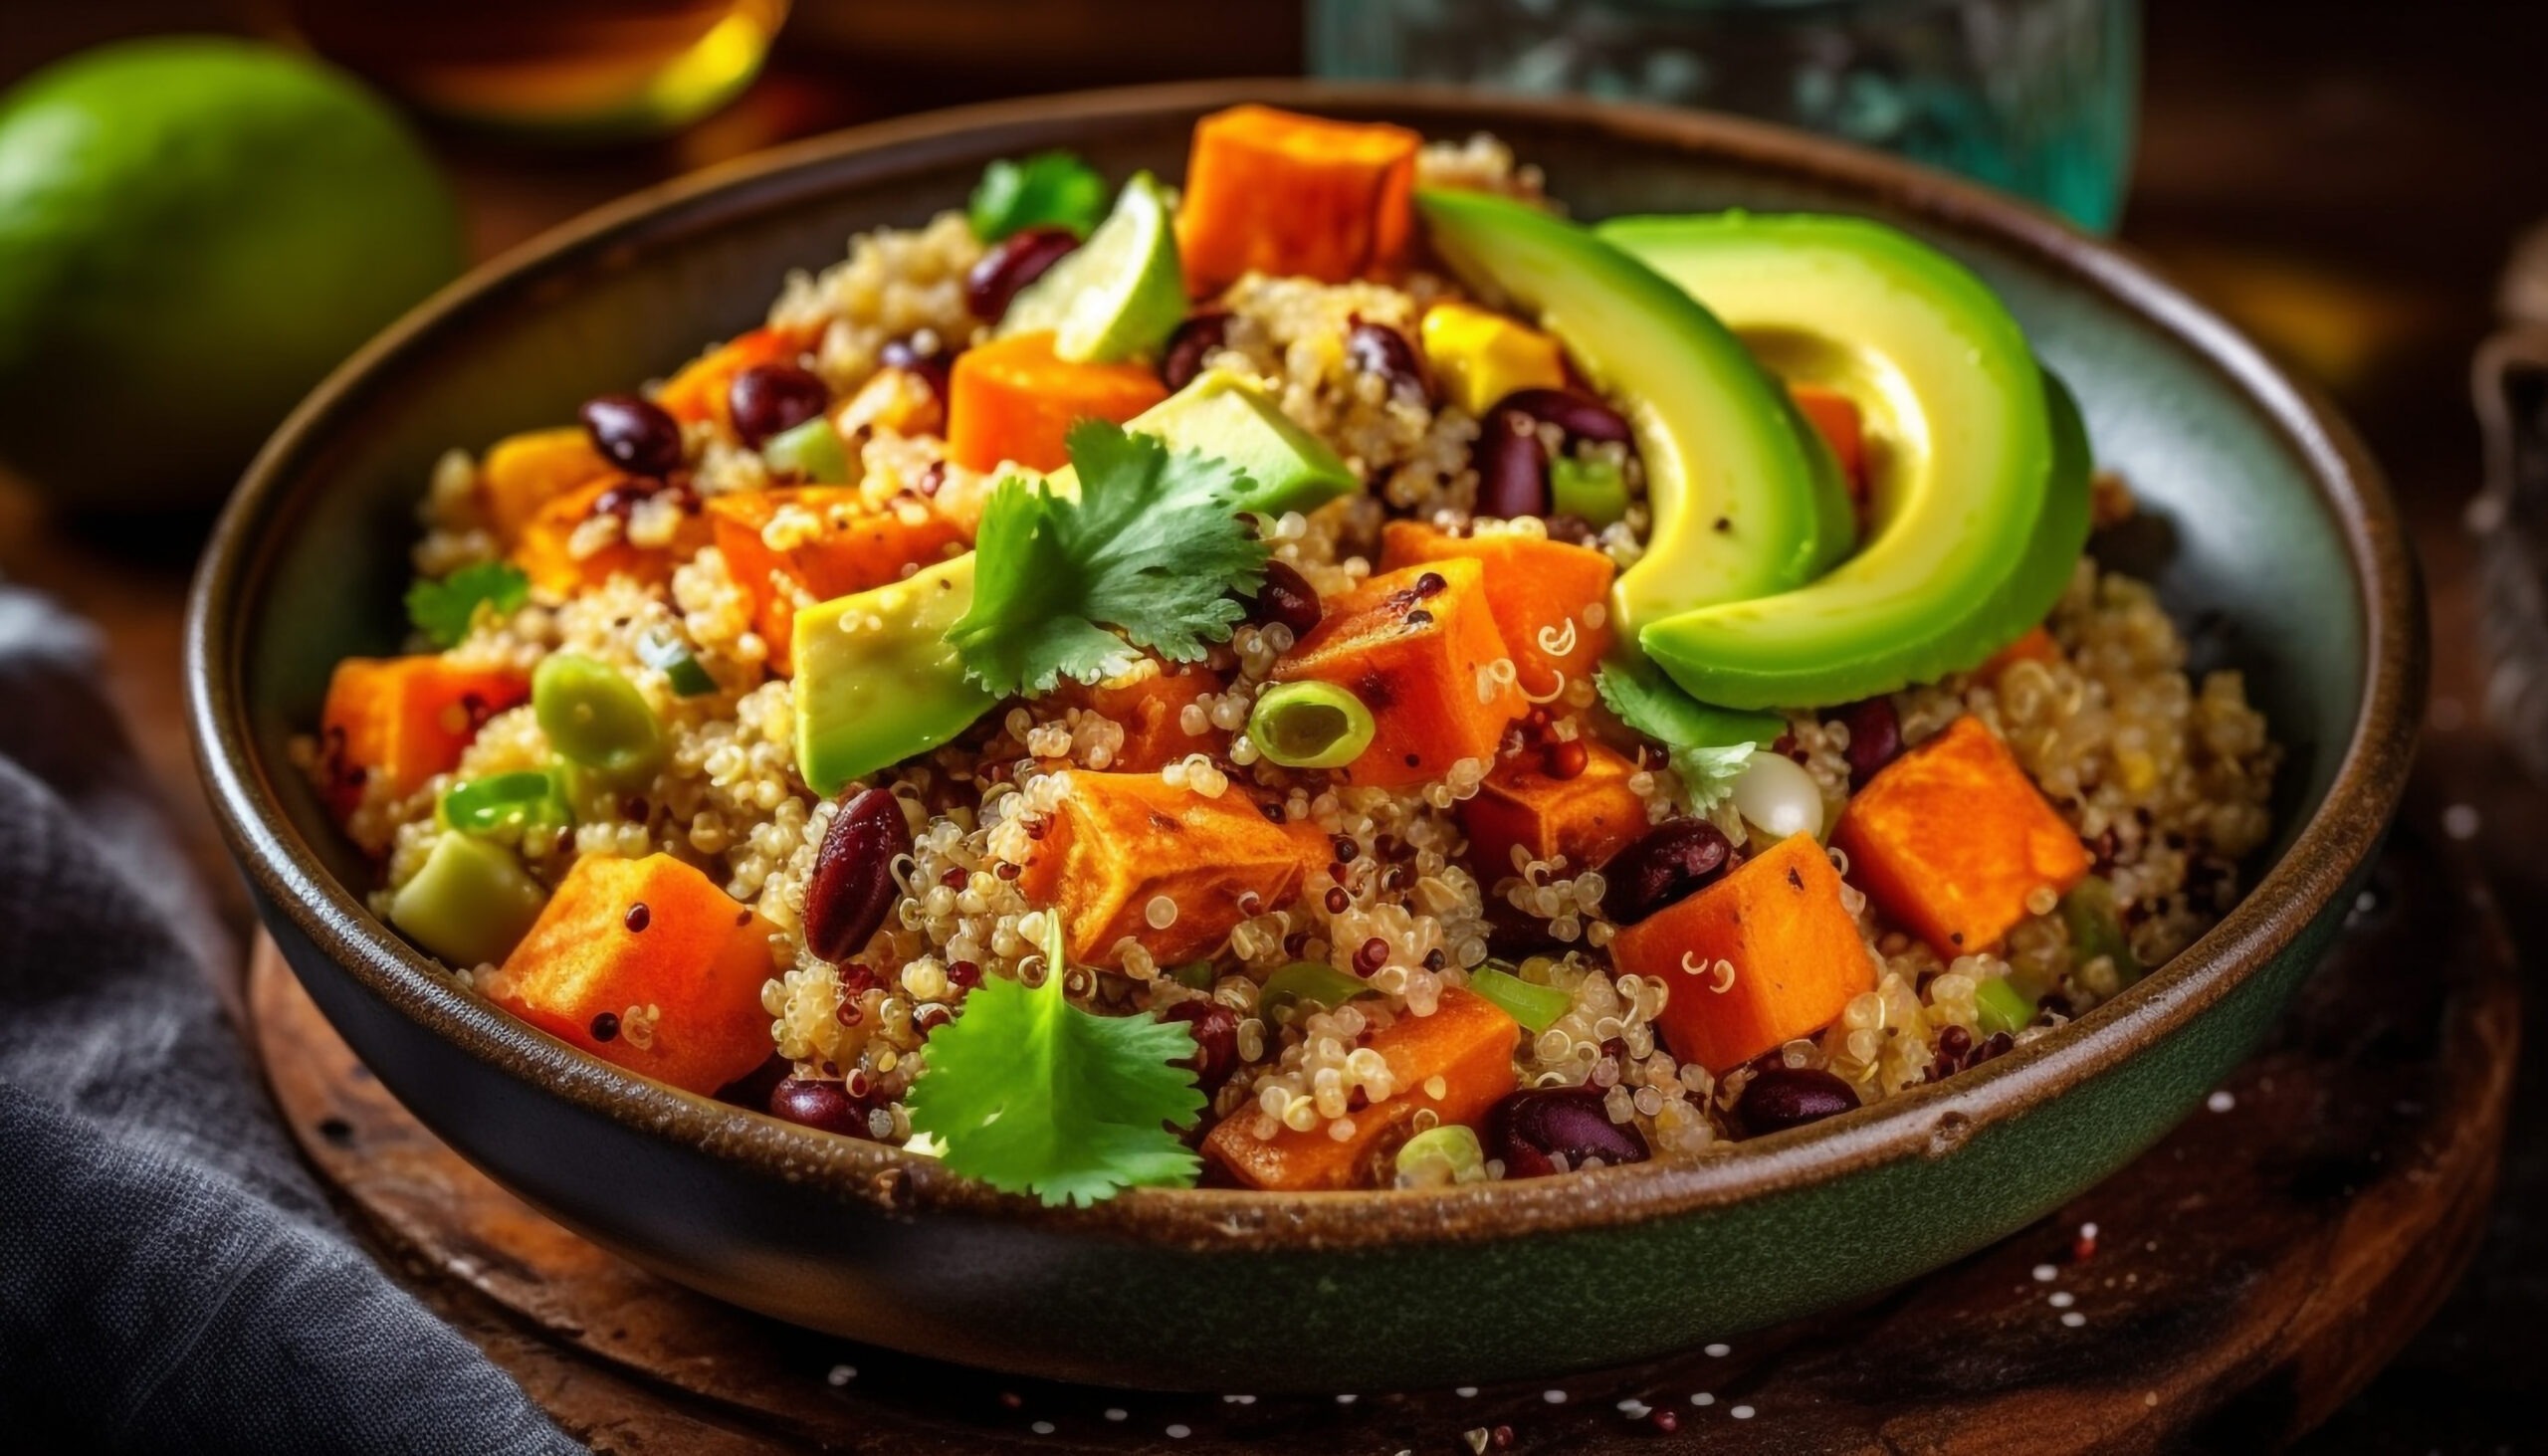 Colorful quinoa salad bowl with roasted sweet potatoes, black beans, creamy avocado slices, and fresh cilantro, served on a rustic wooden table. perfect for a healthy and vibrant meal.